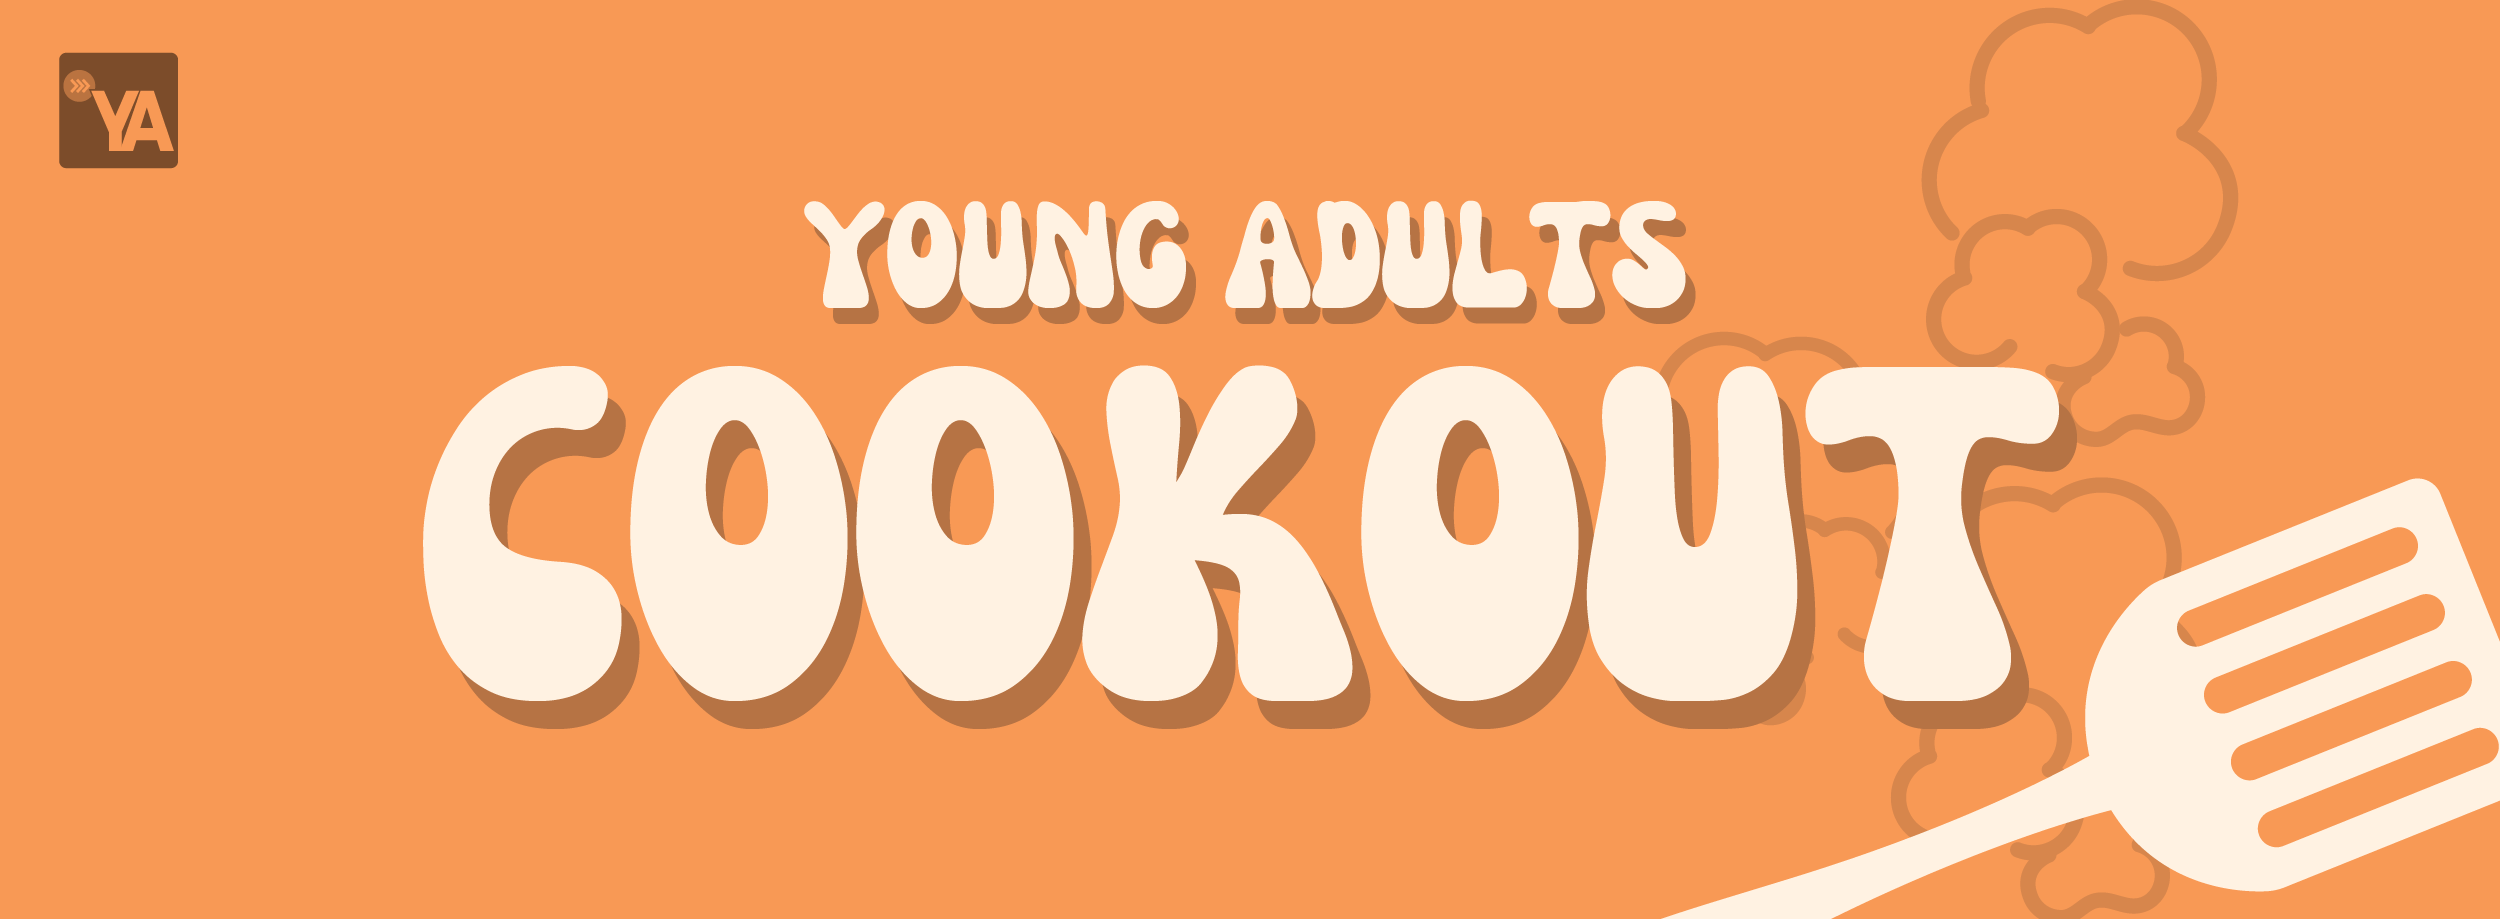 Young Adults Cookout